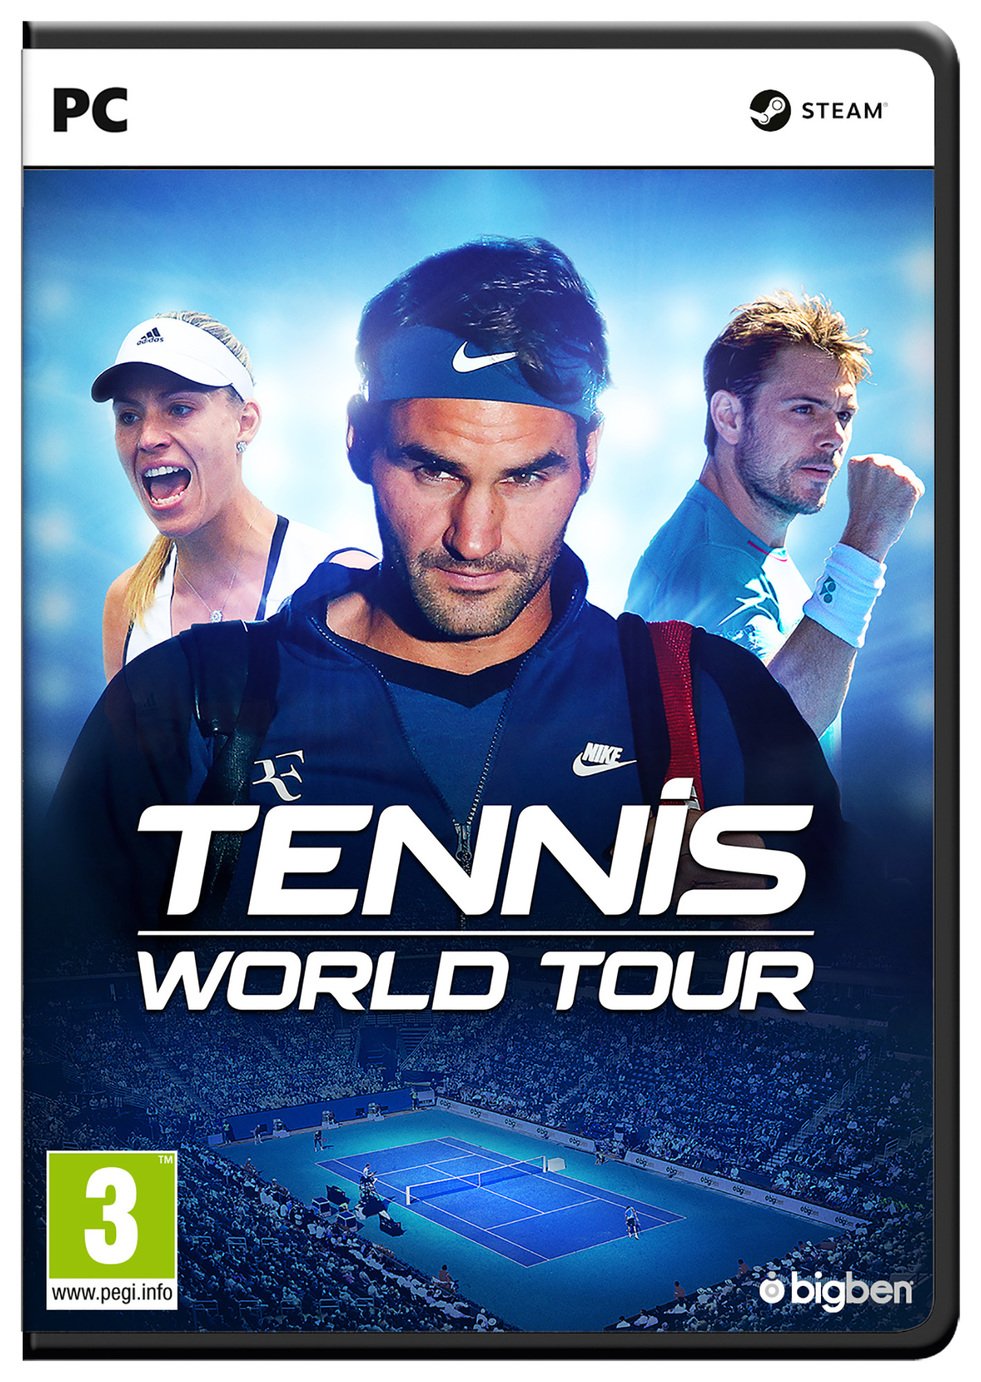 Tennis World Tour PC Game review